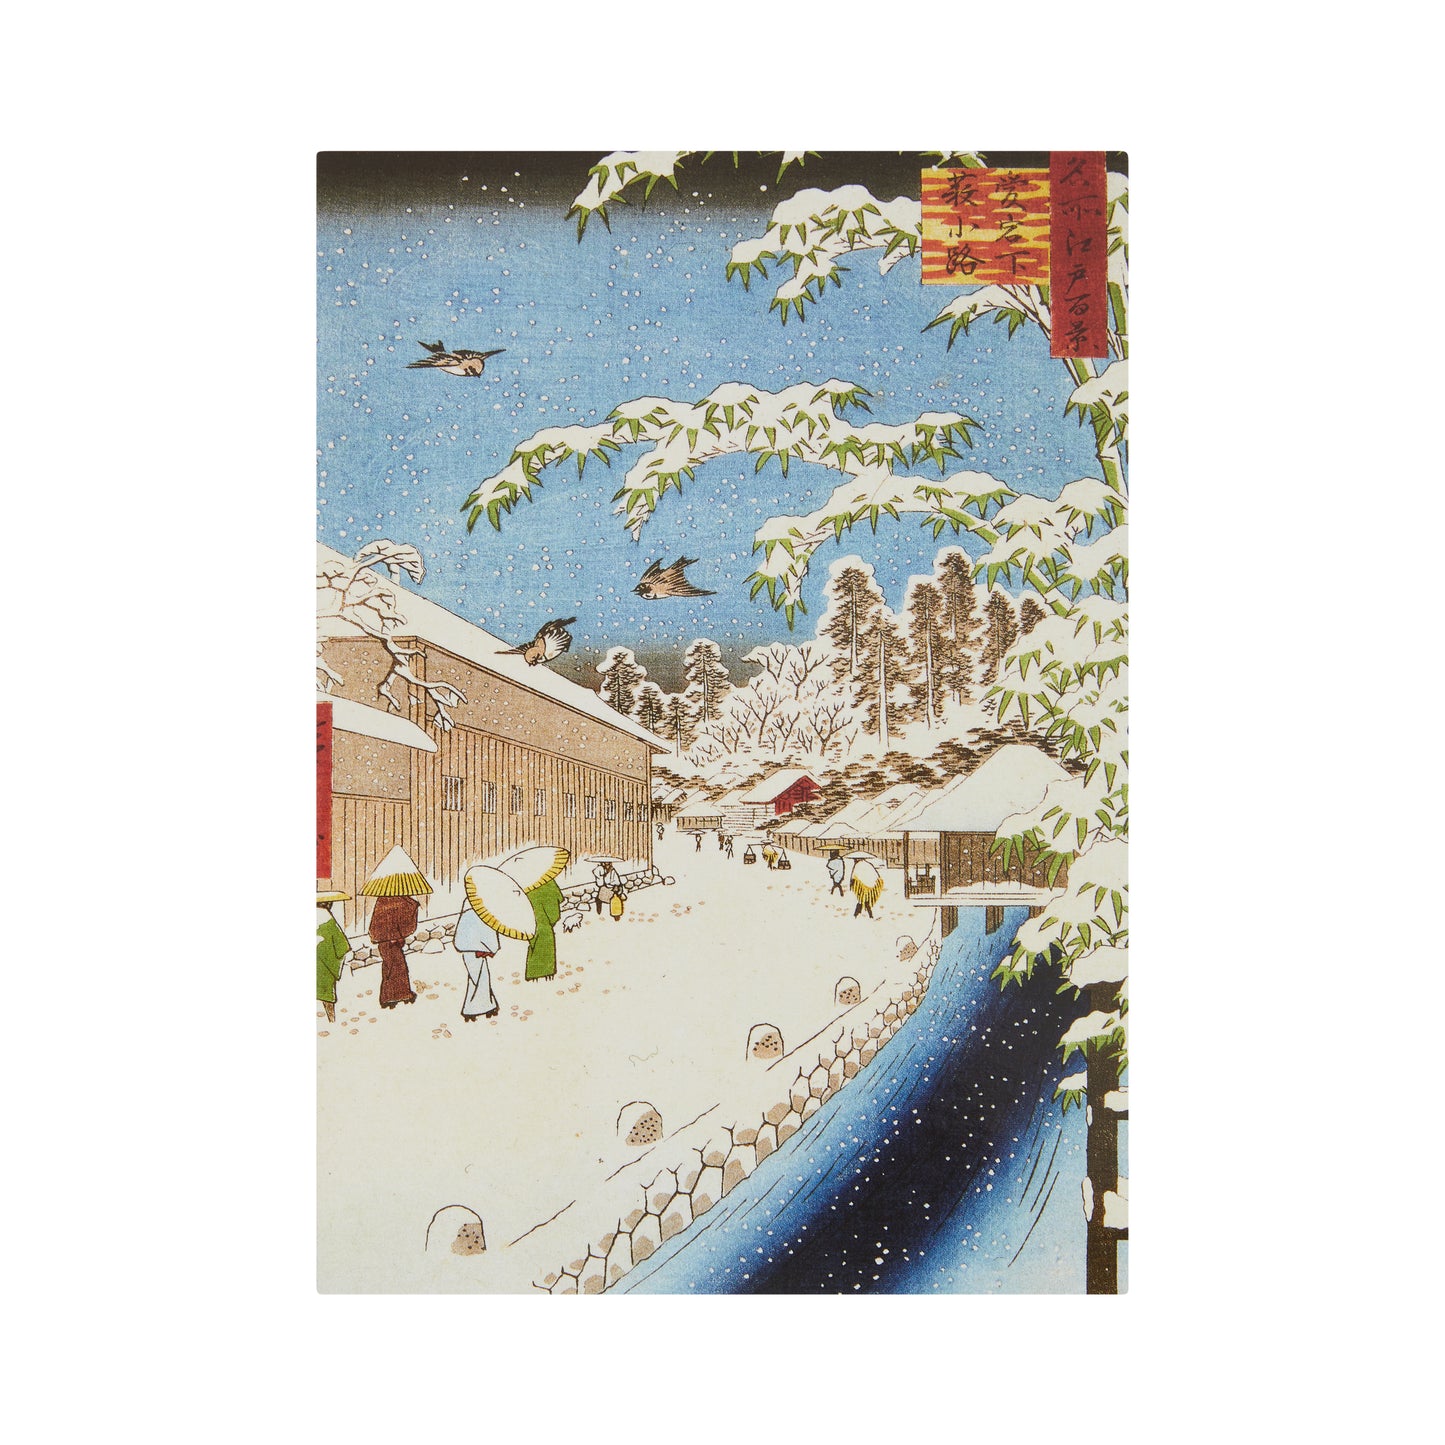 Rectangular Christmas card, portrait format. Snowy Japanese street scene, with blue sky, snowy tree, and people walking with parasols. By Hiroshige. From the collection of The Fitzwilliam Museum